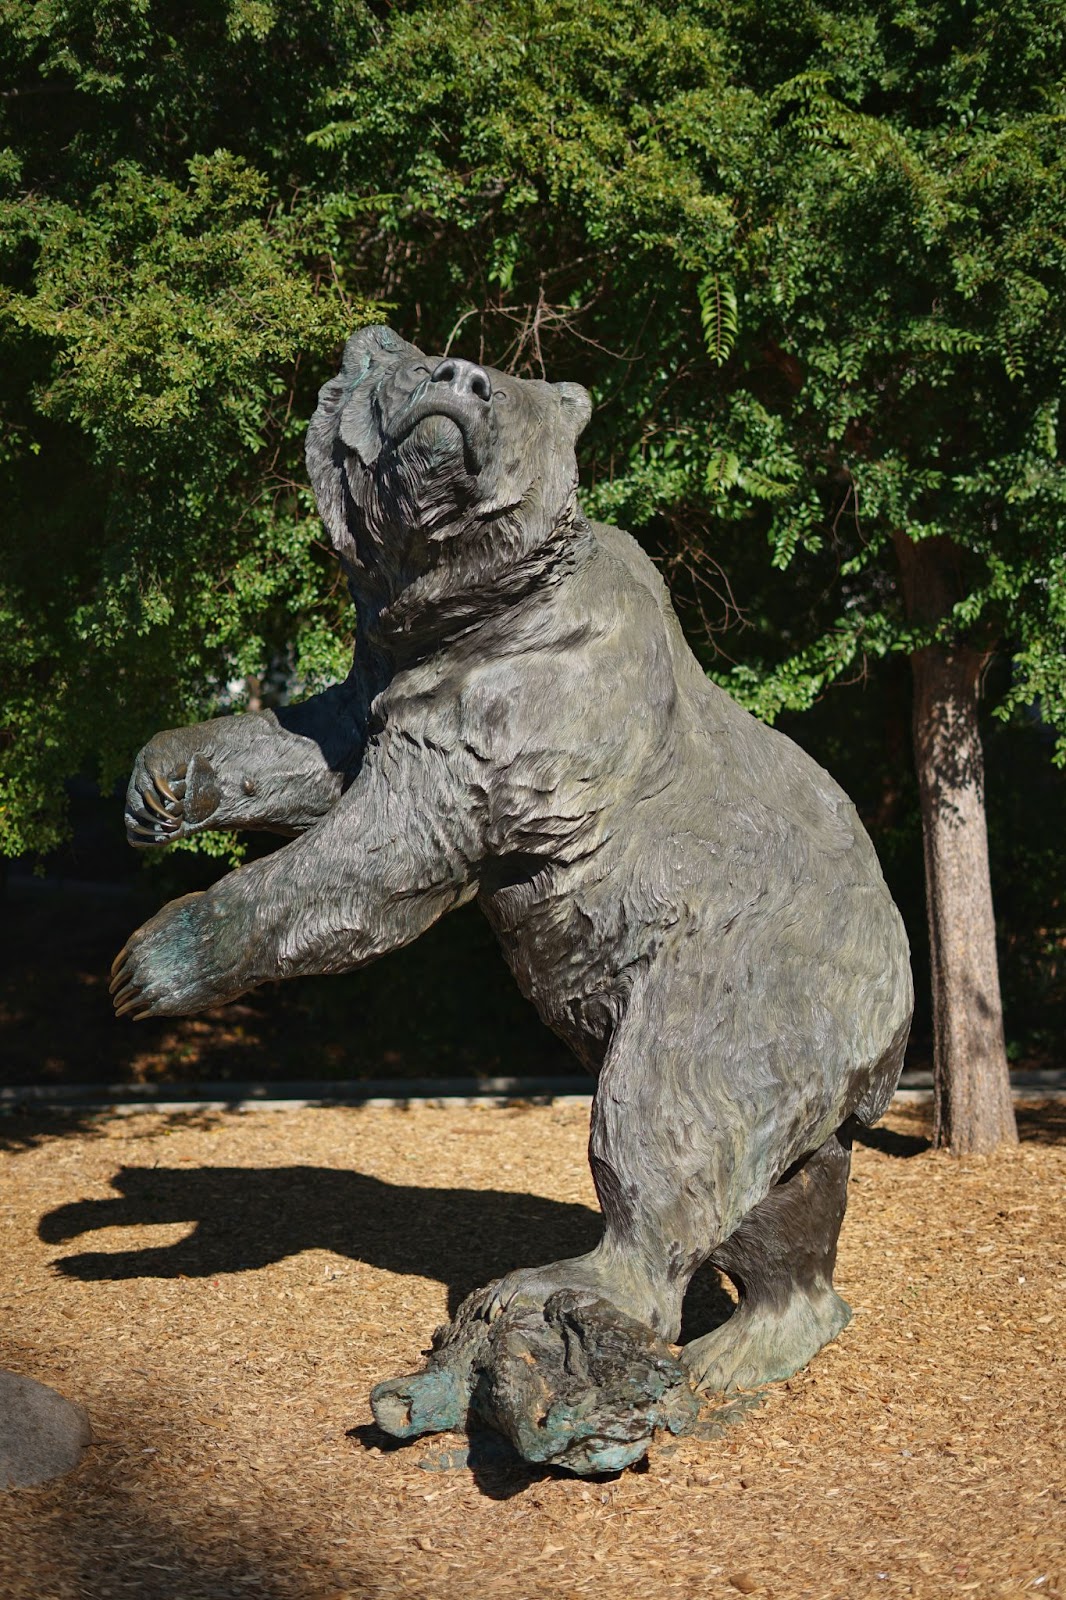 A close-up of a statue of a bear looking up, surrounded by trees.